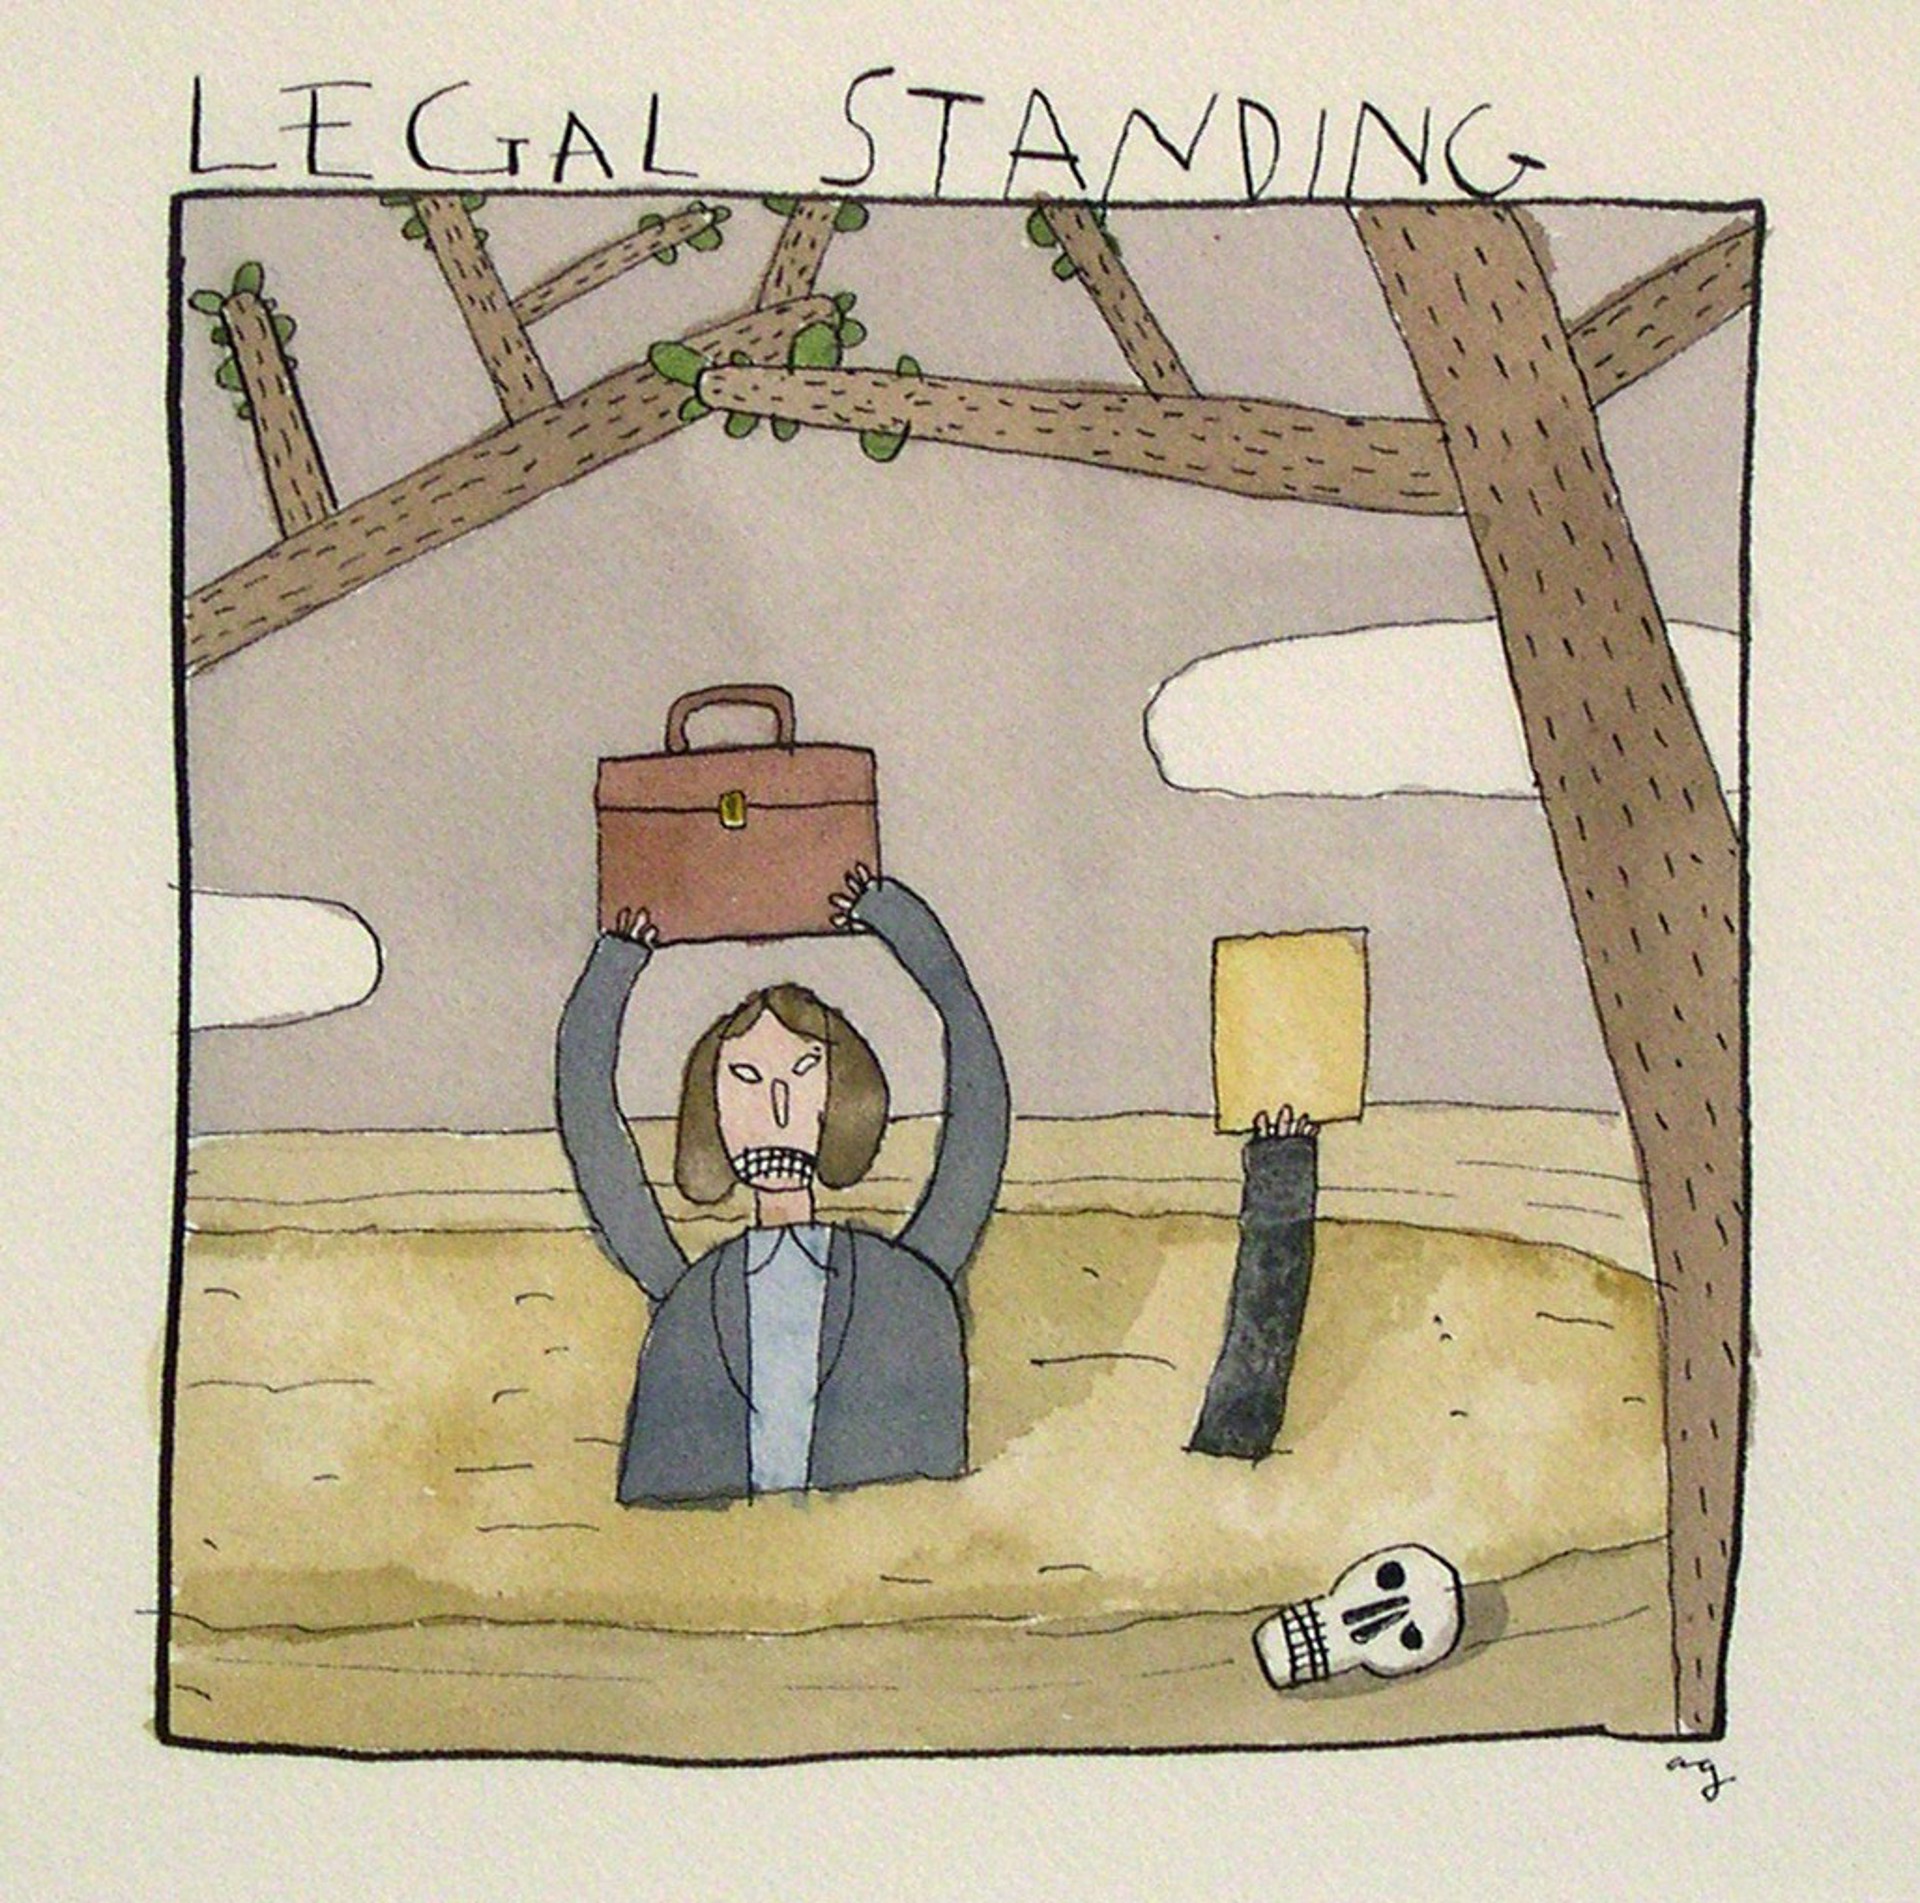 Legal Standing by Alan Gerson